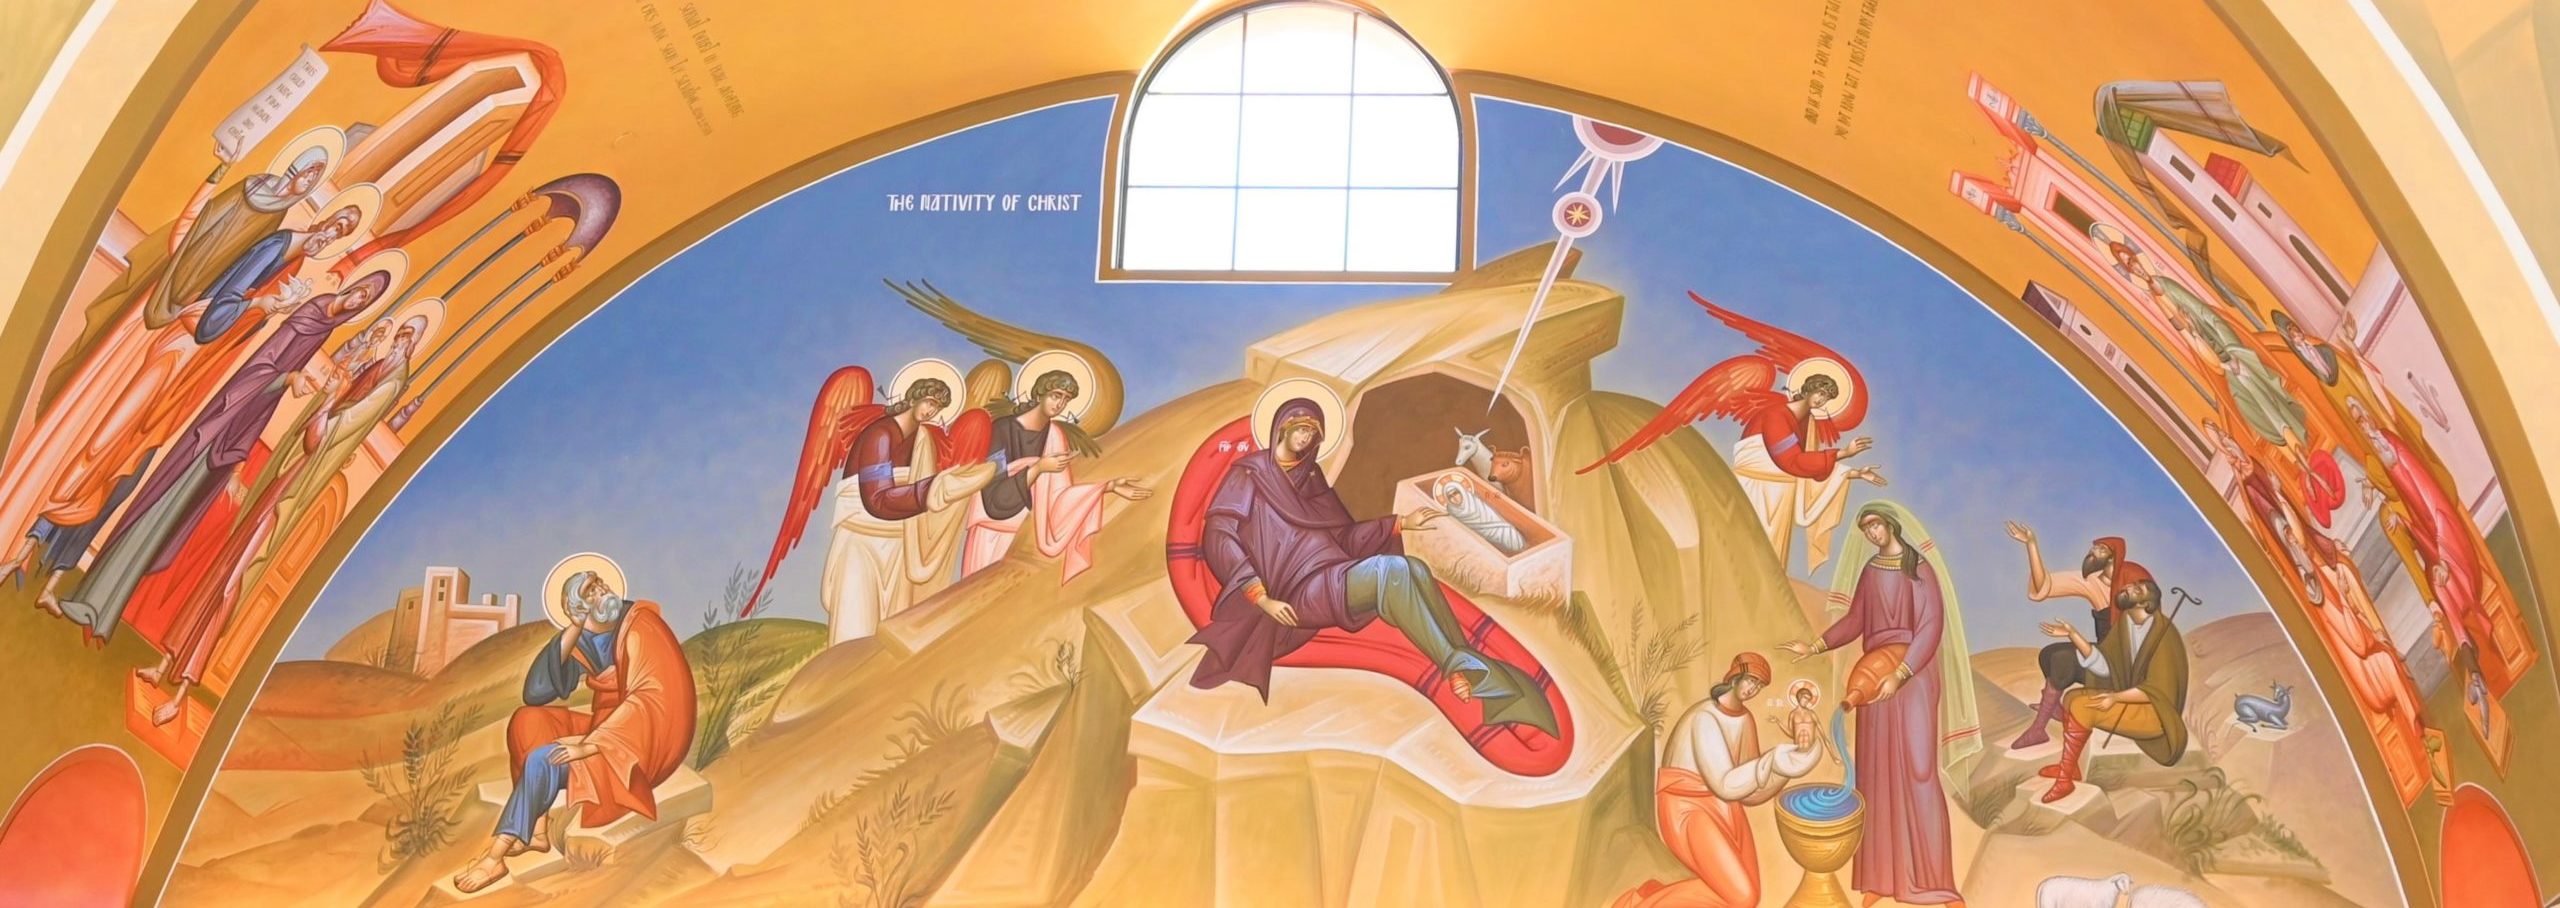 https://www.stgindy.org/wp-content/uploads/2021/10/Nativity-Icon-scaled-e1638564077377.jpg